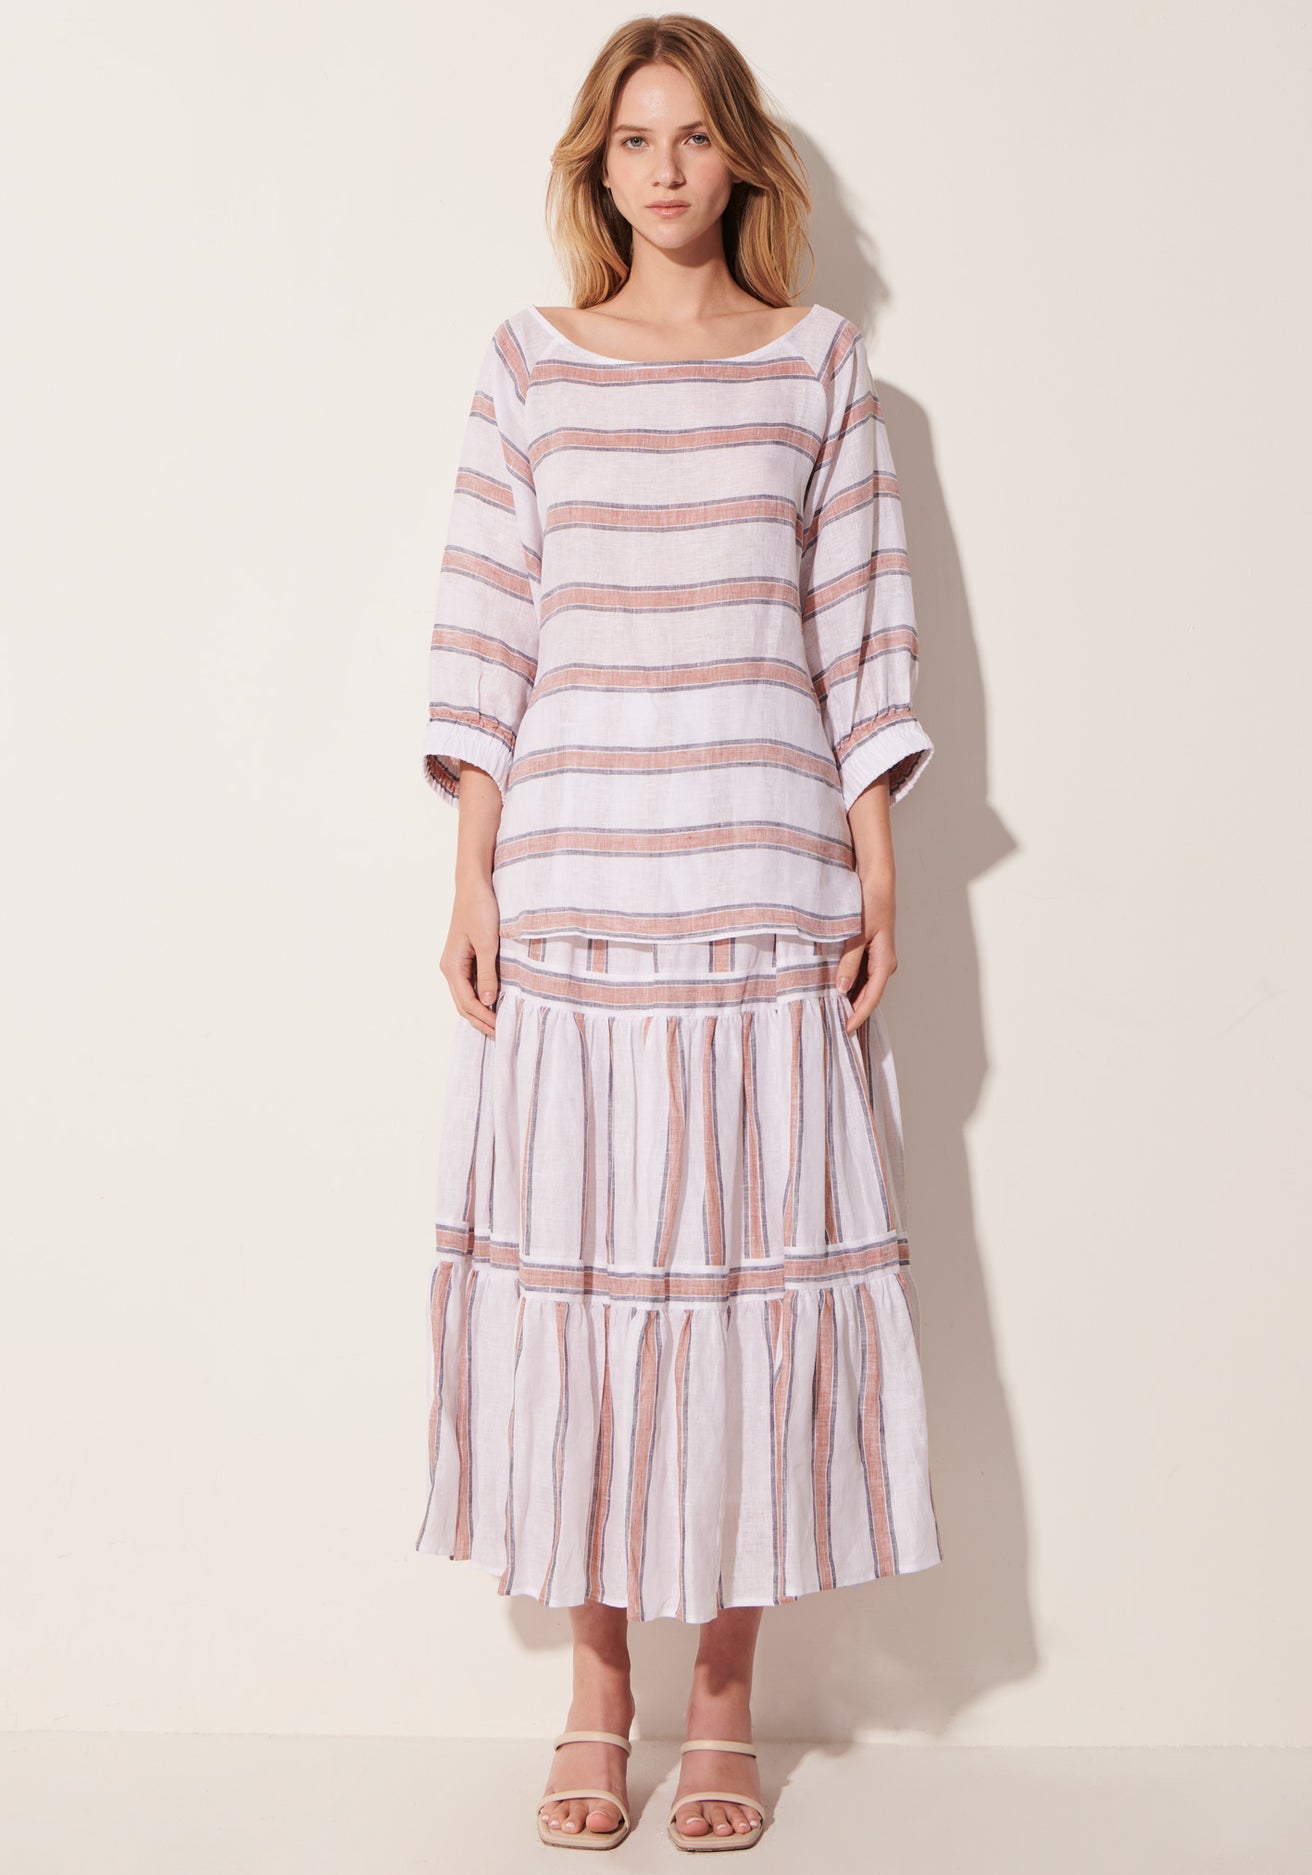 Florence Top in Florence Stripe